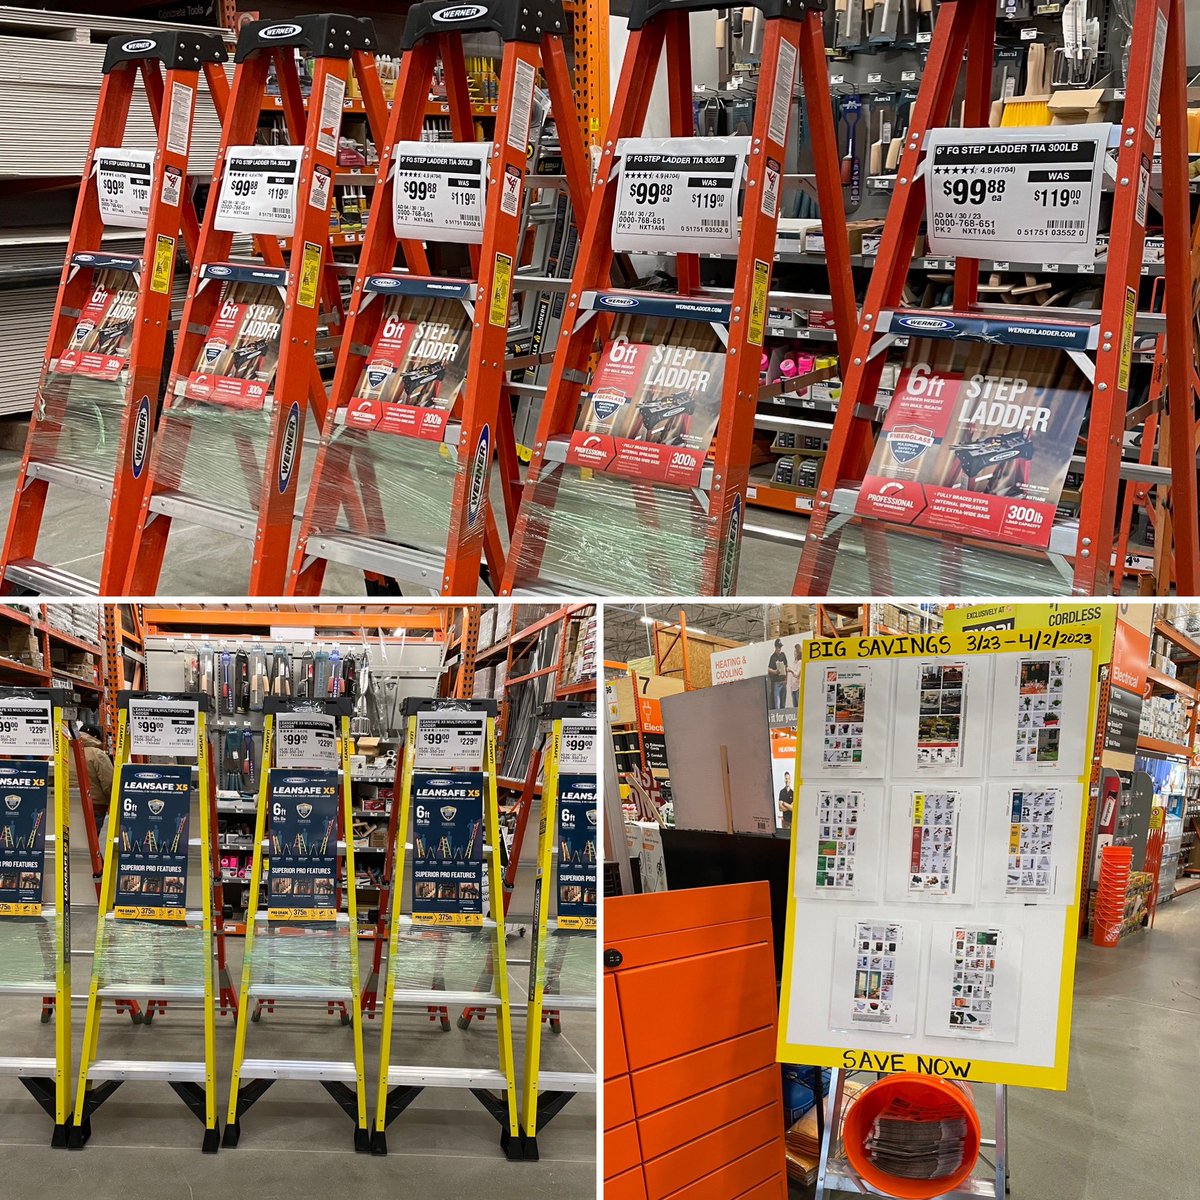 1022 is AD READY!! Let’s go D20! #greatexecutionteam!! #1022WestStockton #pacnorthproud #D20